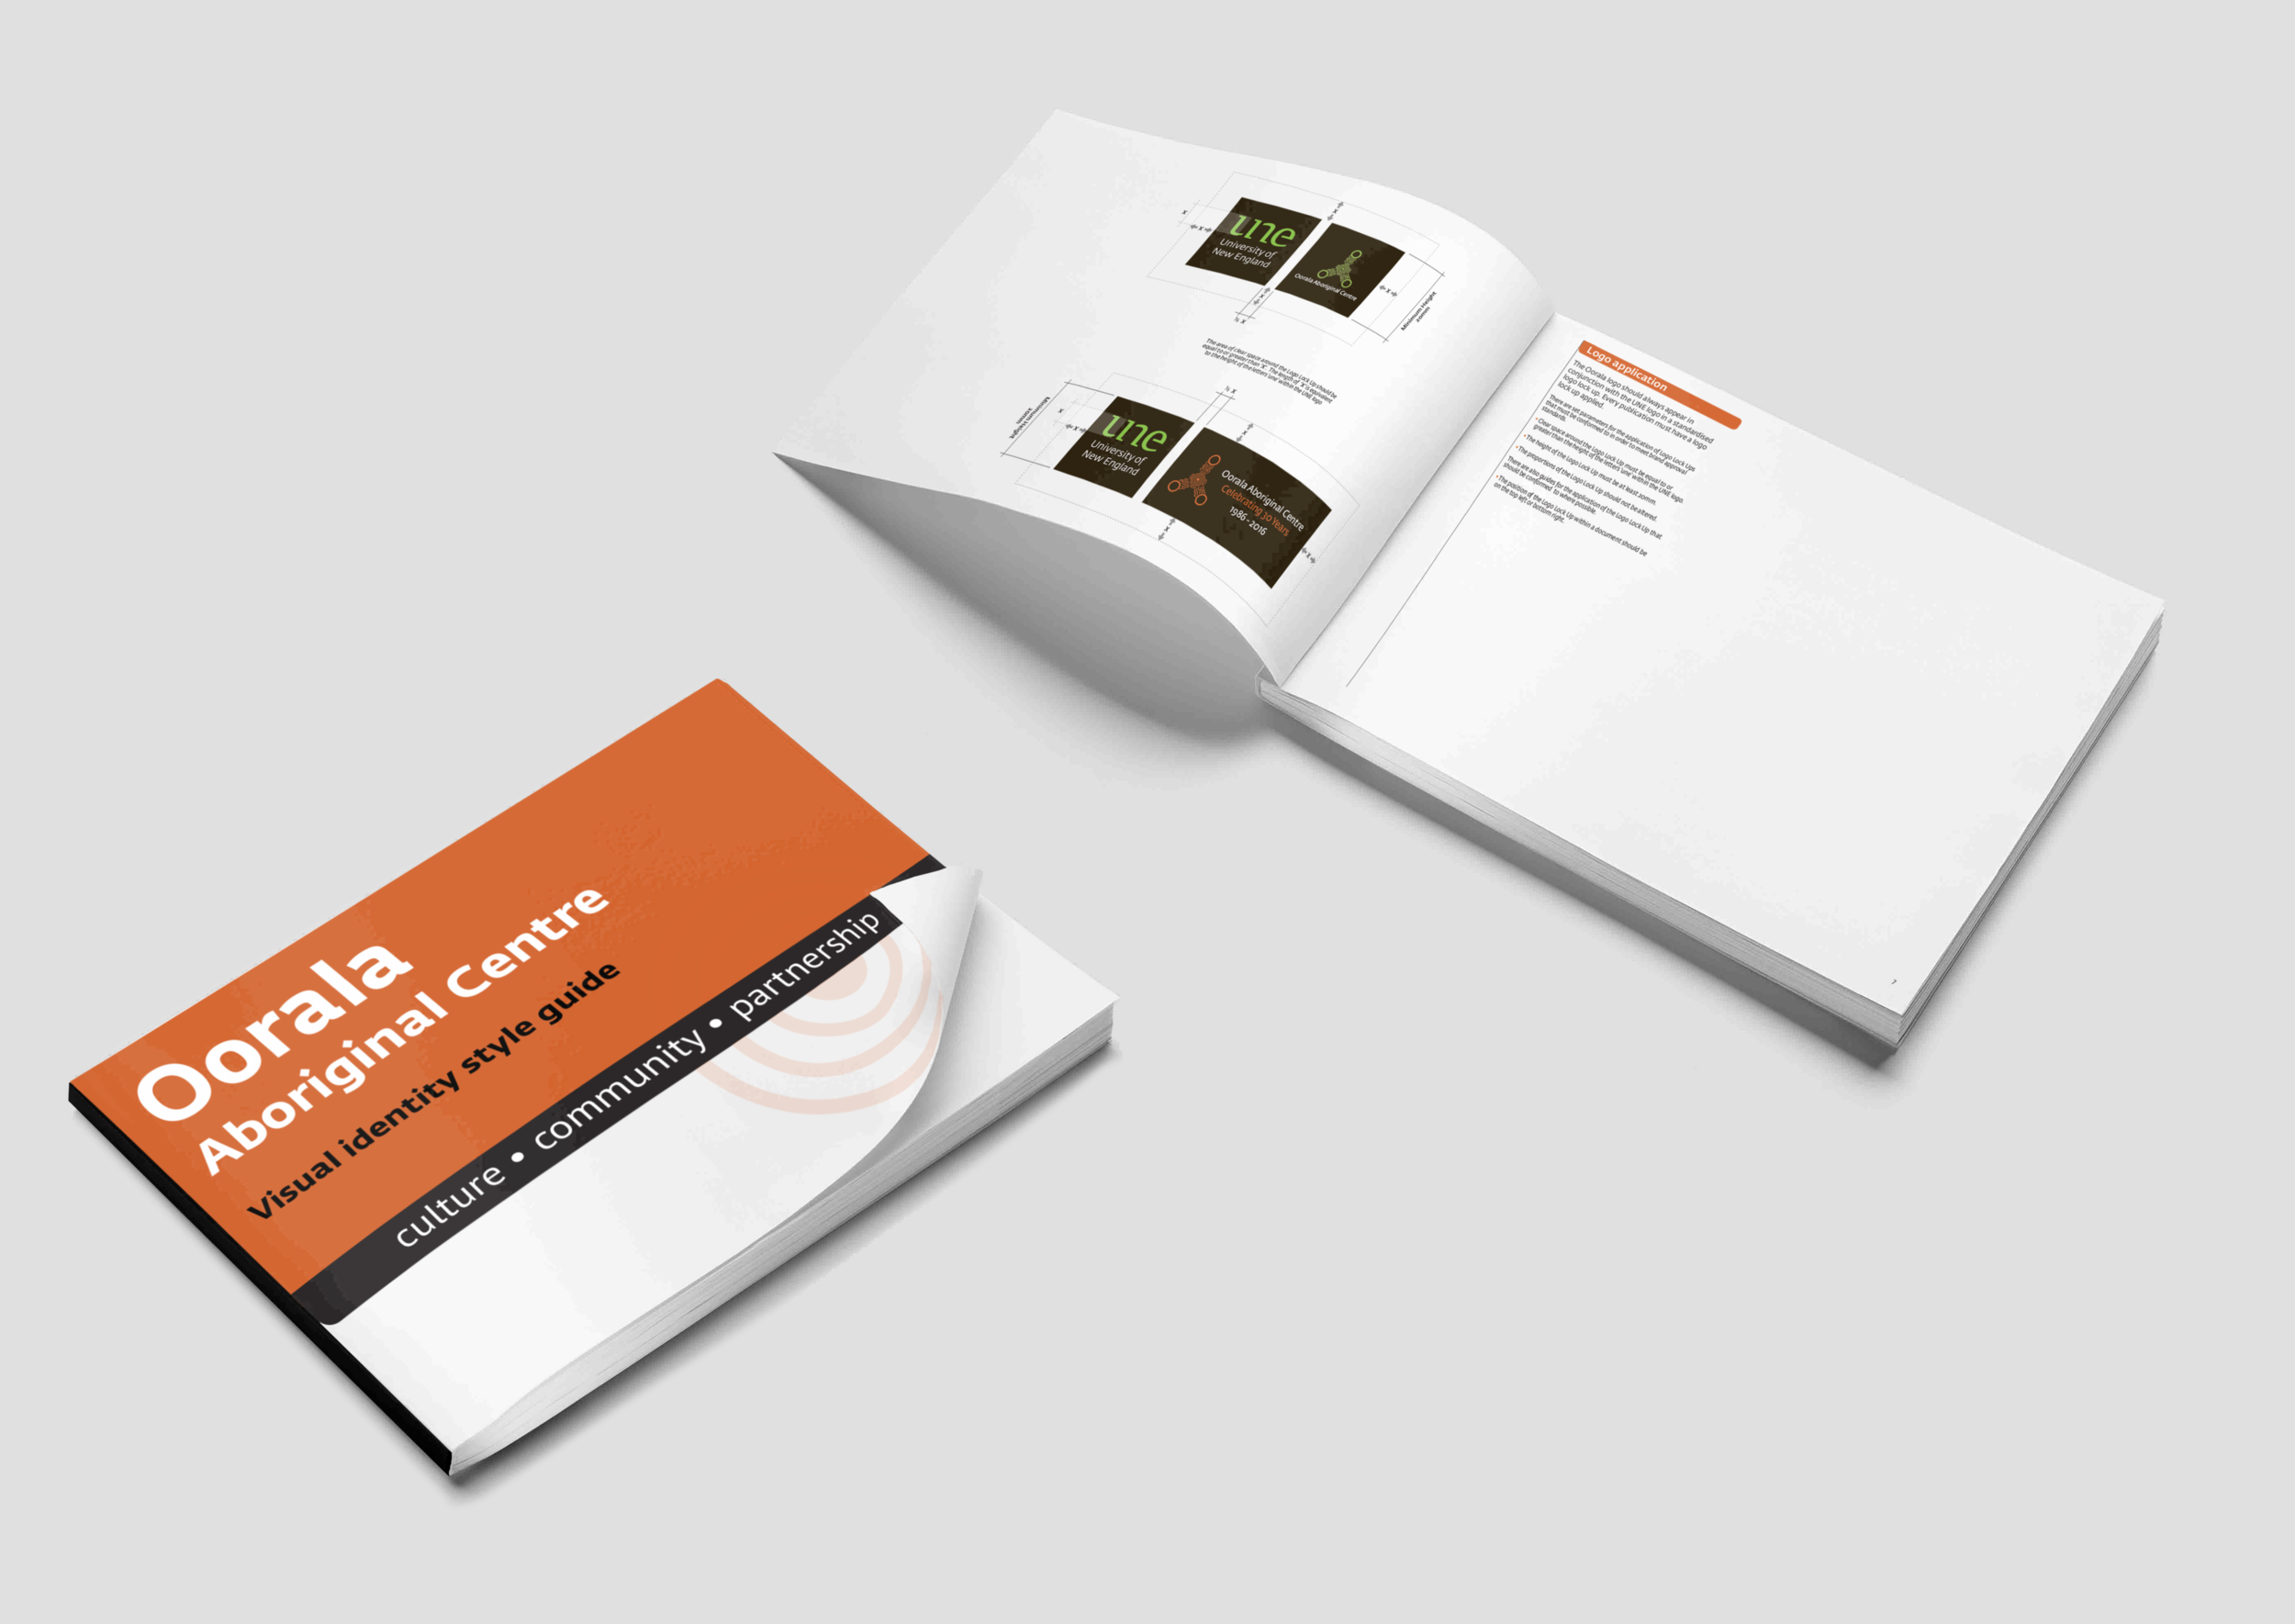 Oorala Visual Identity Style Guide